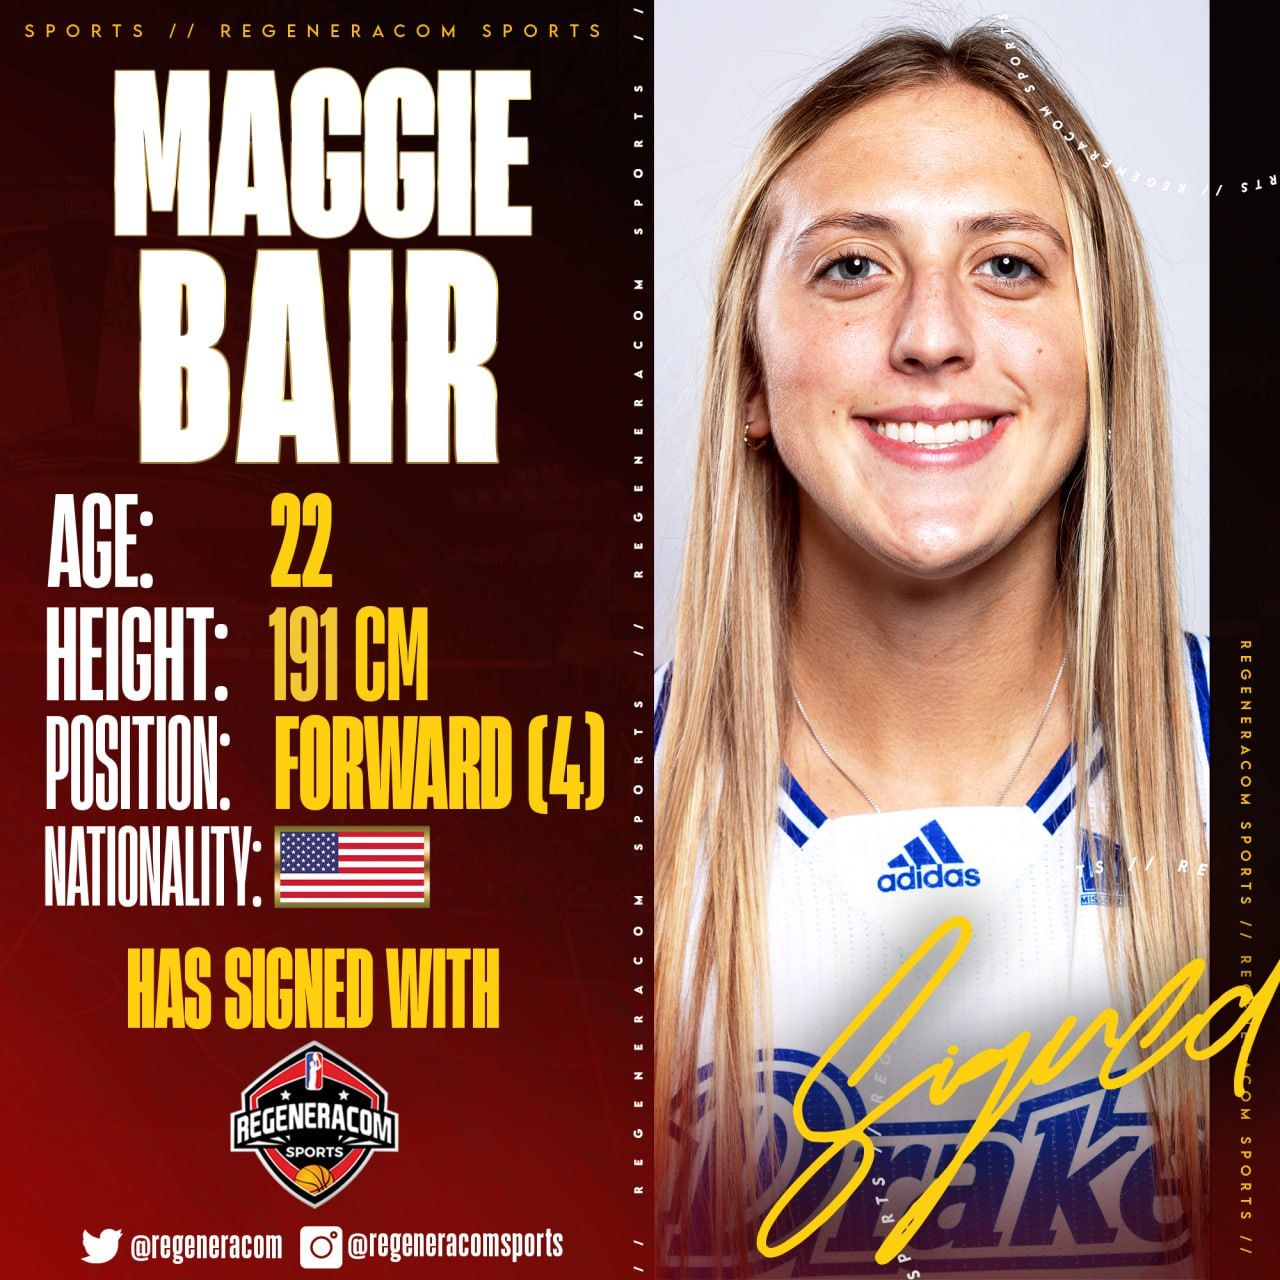 MAGGIE BAIR has signed with Regeneracom Sports